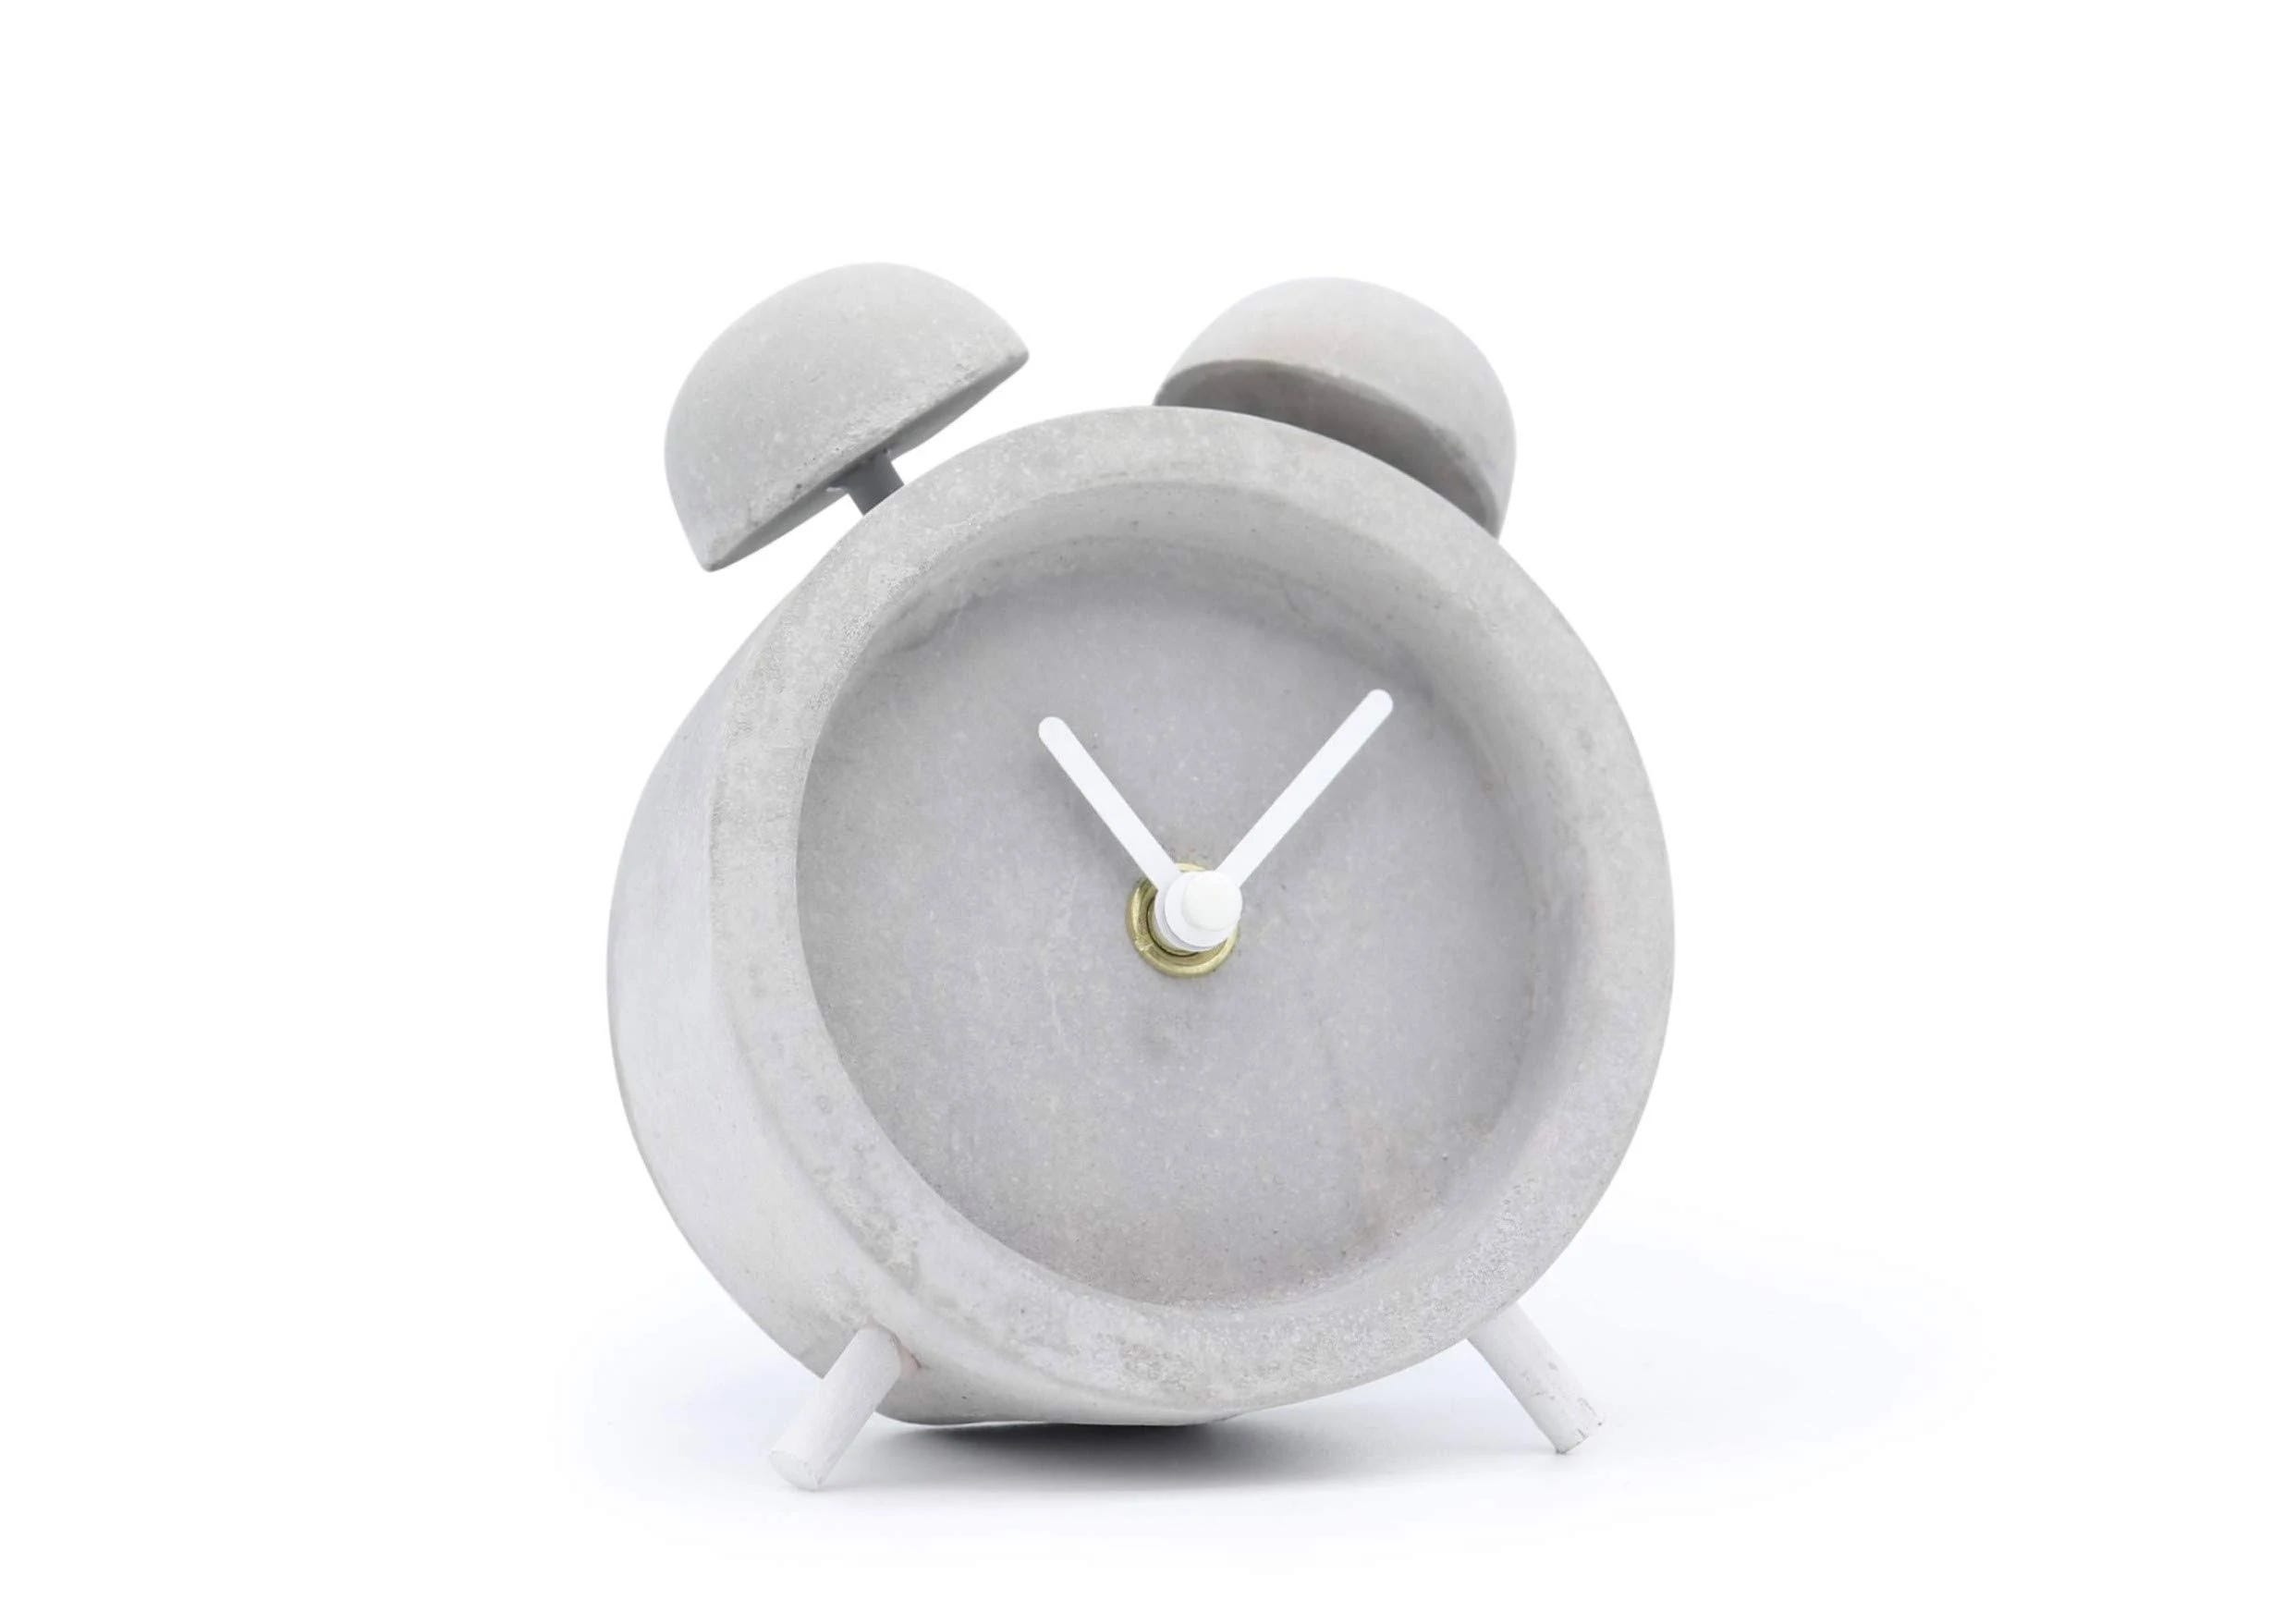 Stylish Concrete Table Clock with Silent Sweep Movement | Image